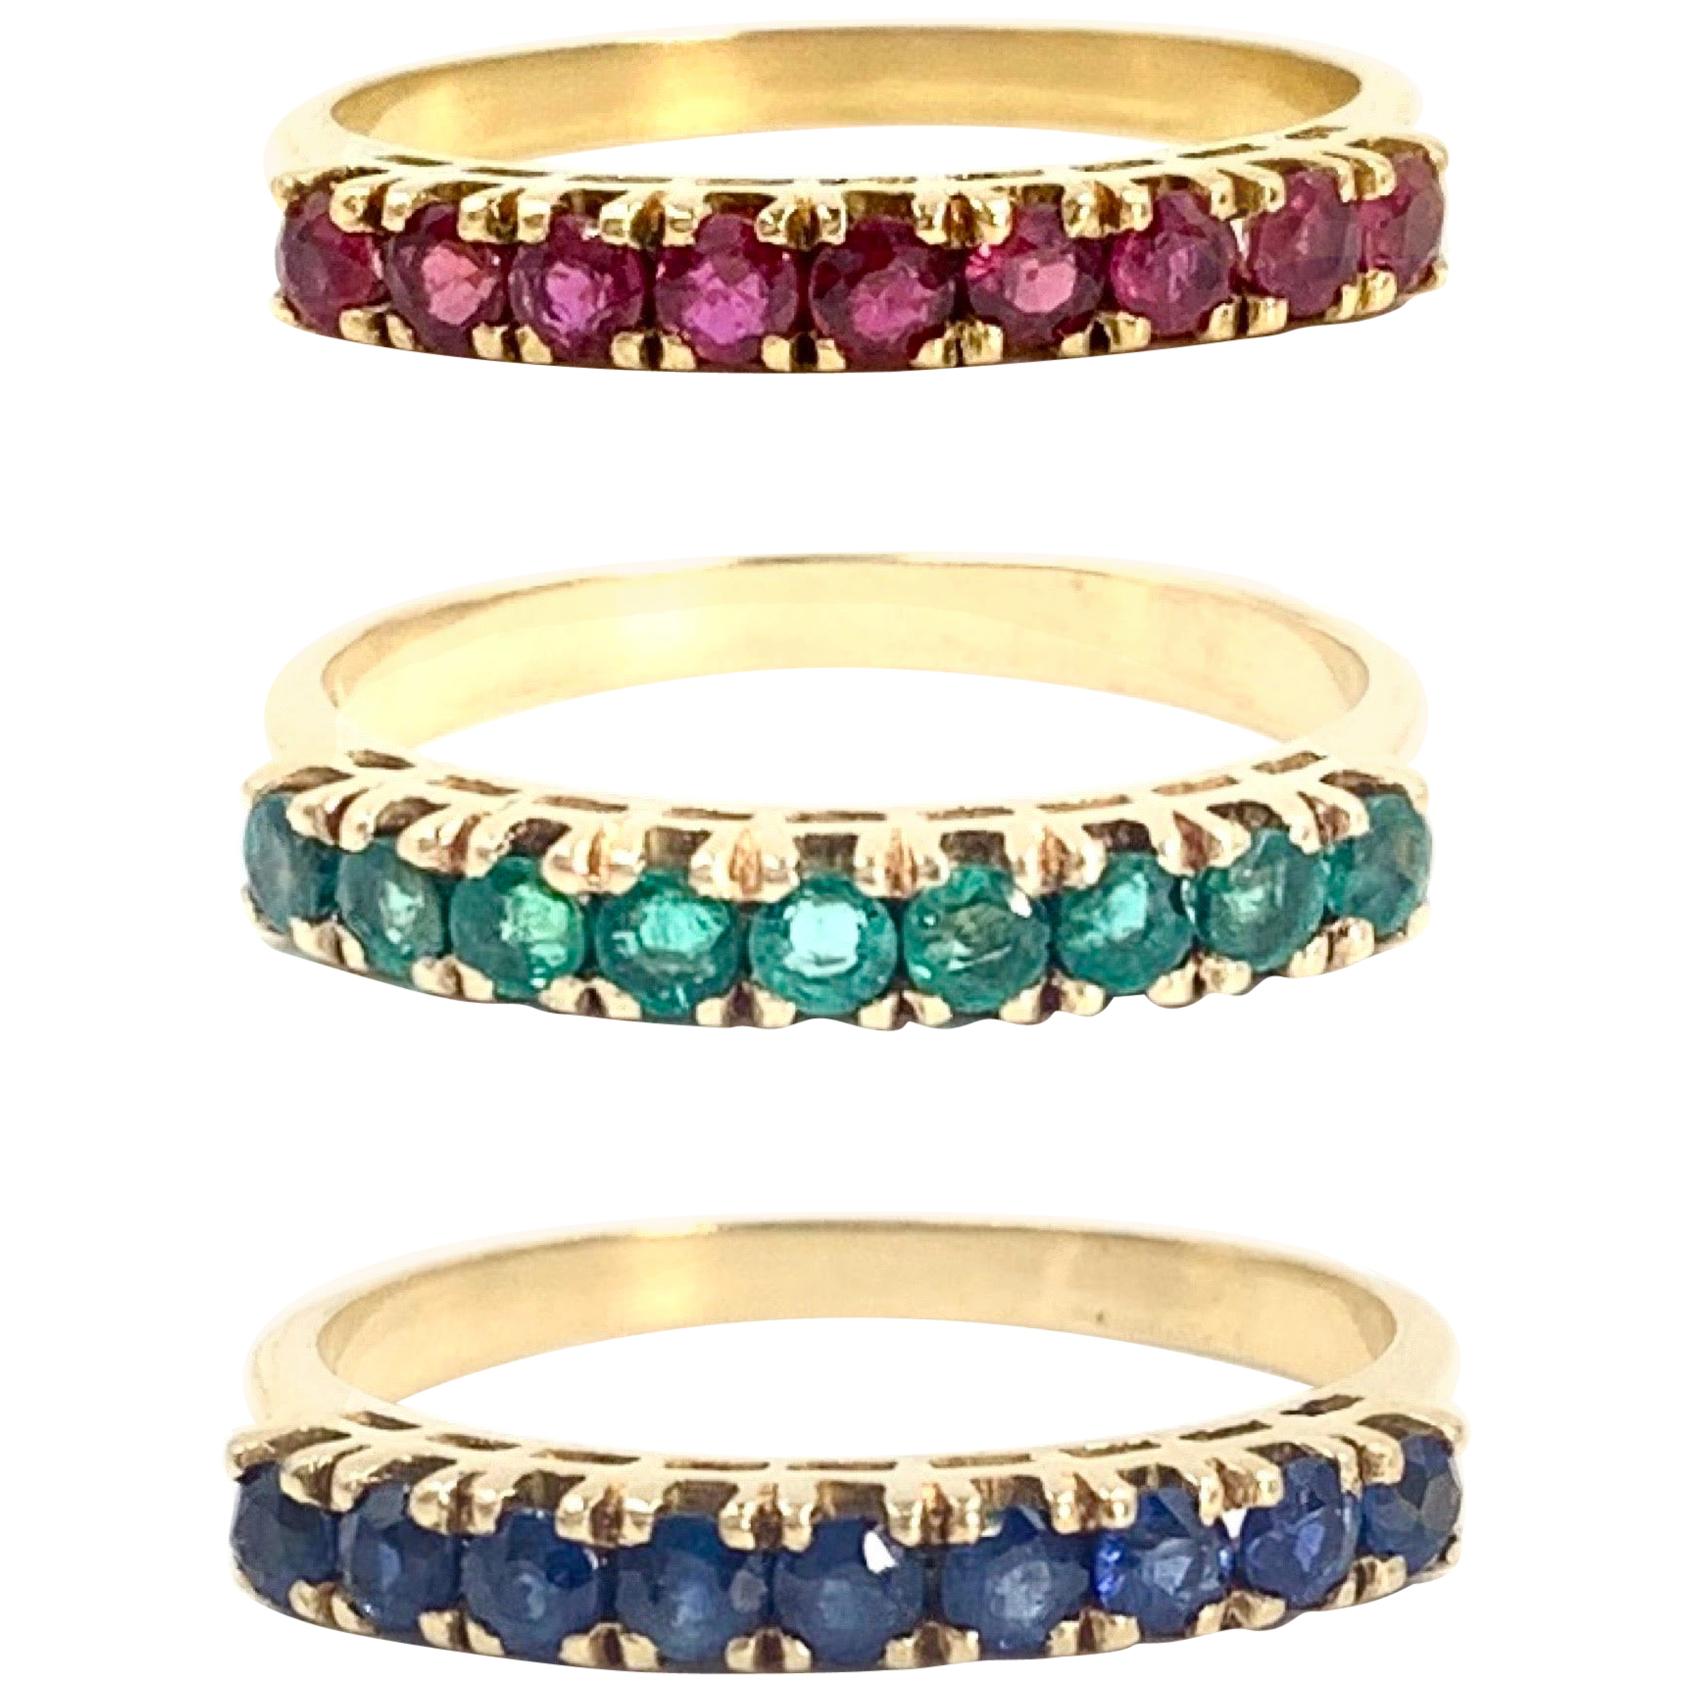 Ruby, Emerald and Blue Sapphire 18 Karat Band Rings Set of Three